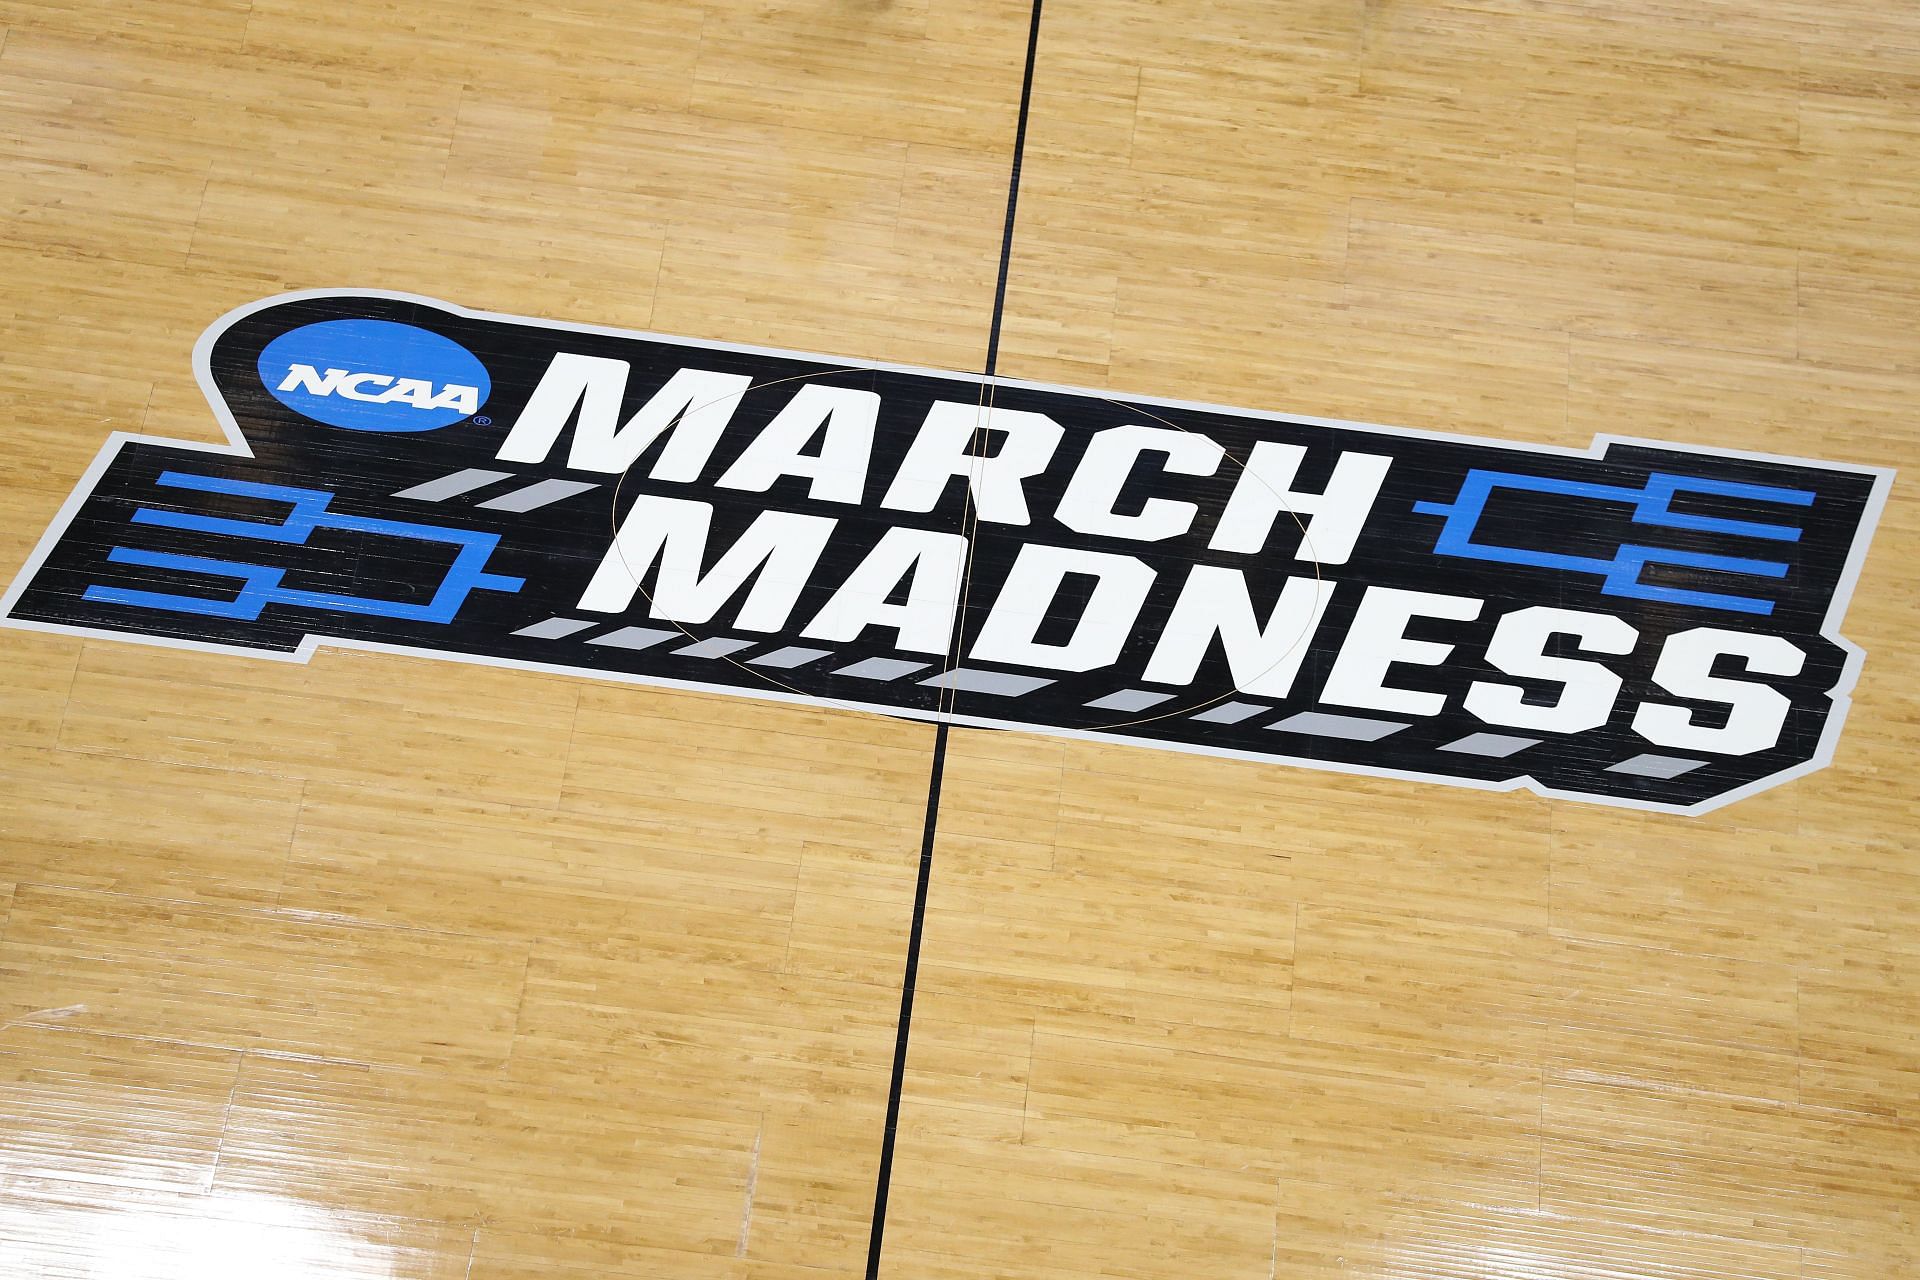 What are some funny March Madness bracket names? Looking at amusing fan